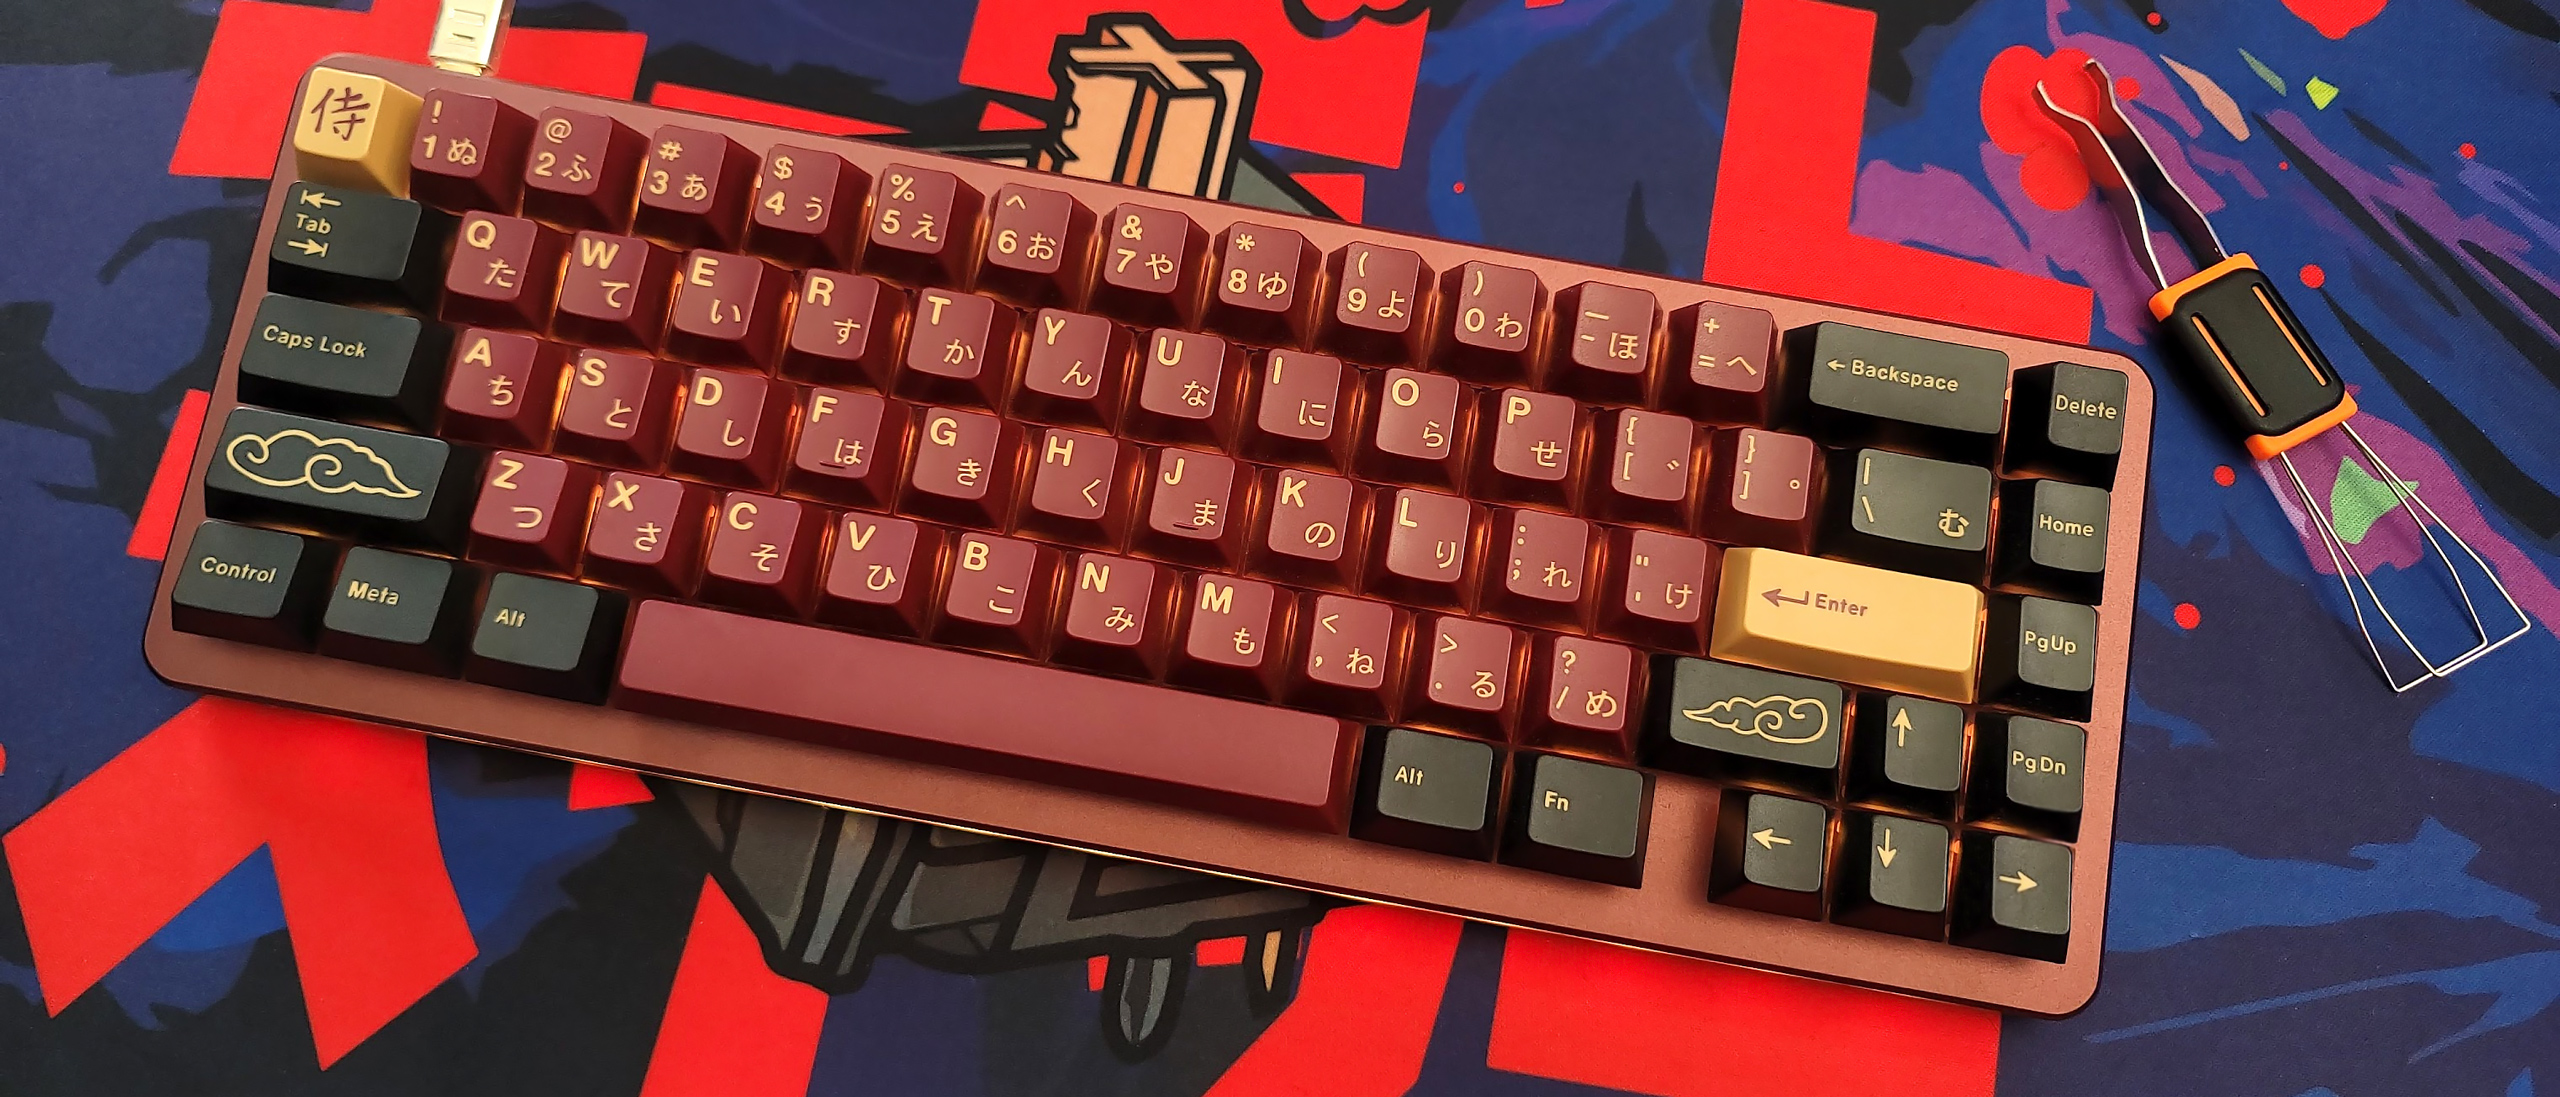 13 Ways to Customize your Mechanical Keyboard